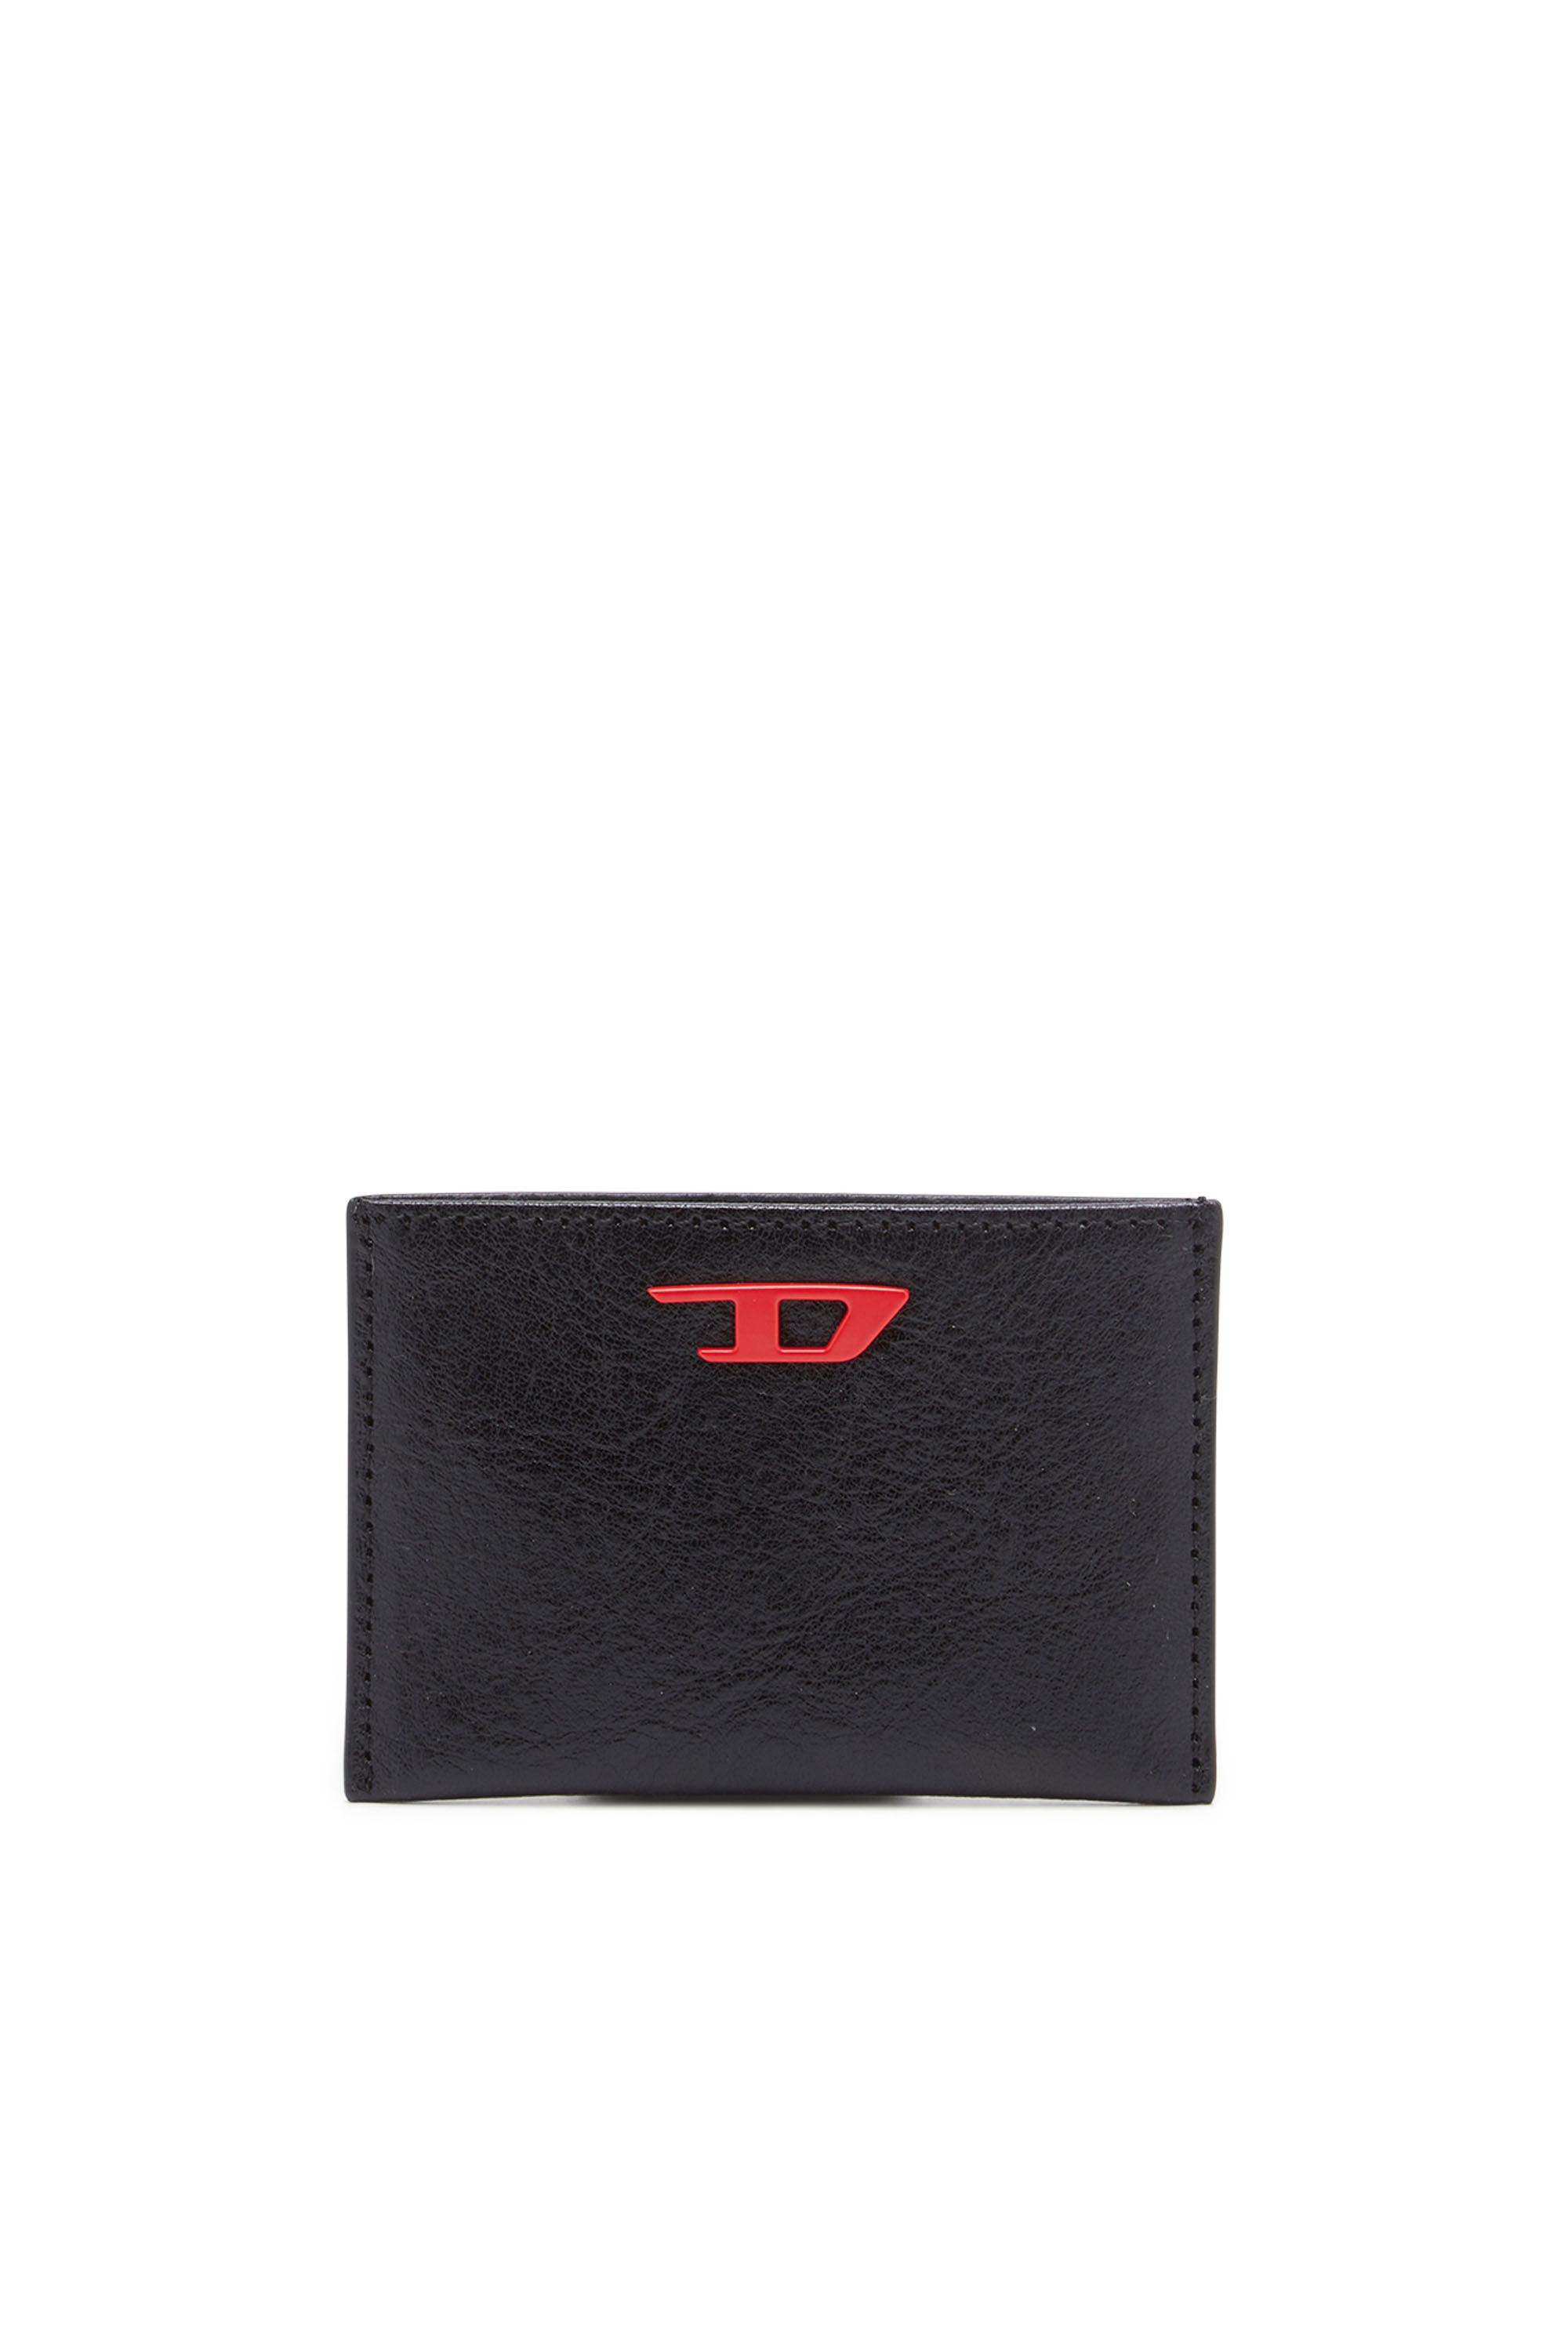 RAVE BI-FOLD COIN S Leather bi-fold wallet with red D plaque